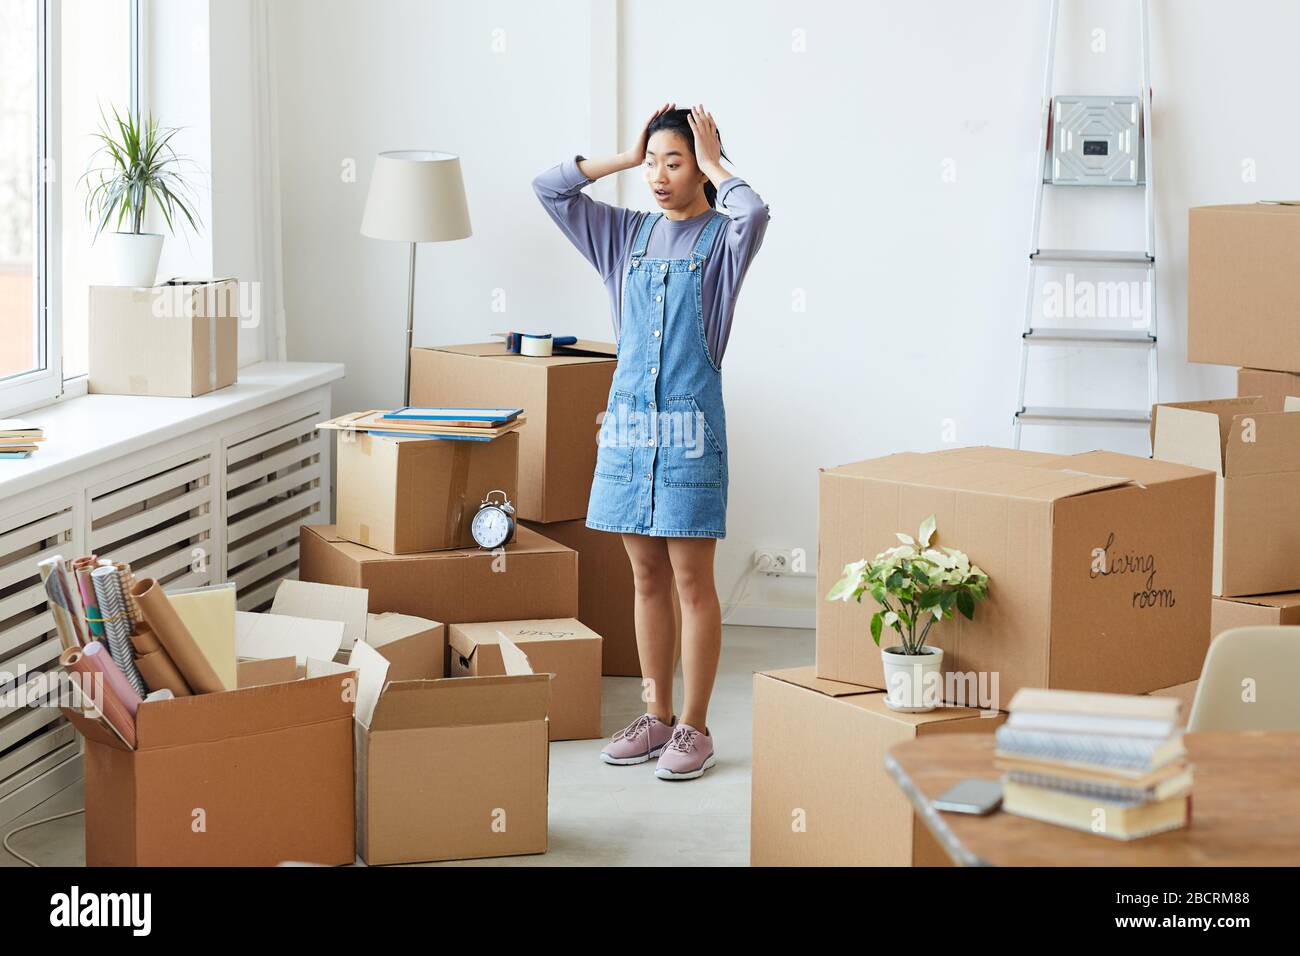 Full length portrait of frustrated Asian woman panicking while standing among cardboard boxes in empty room, house moving or relocation concept, copy Stock Photo